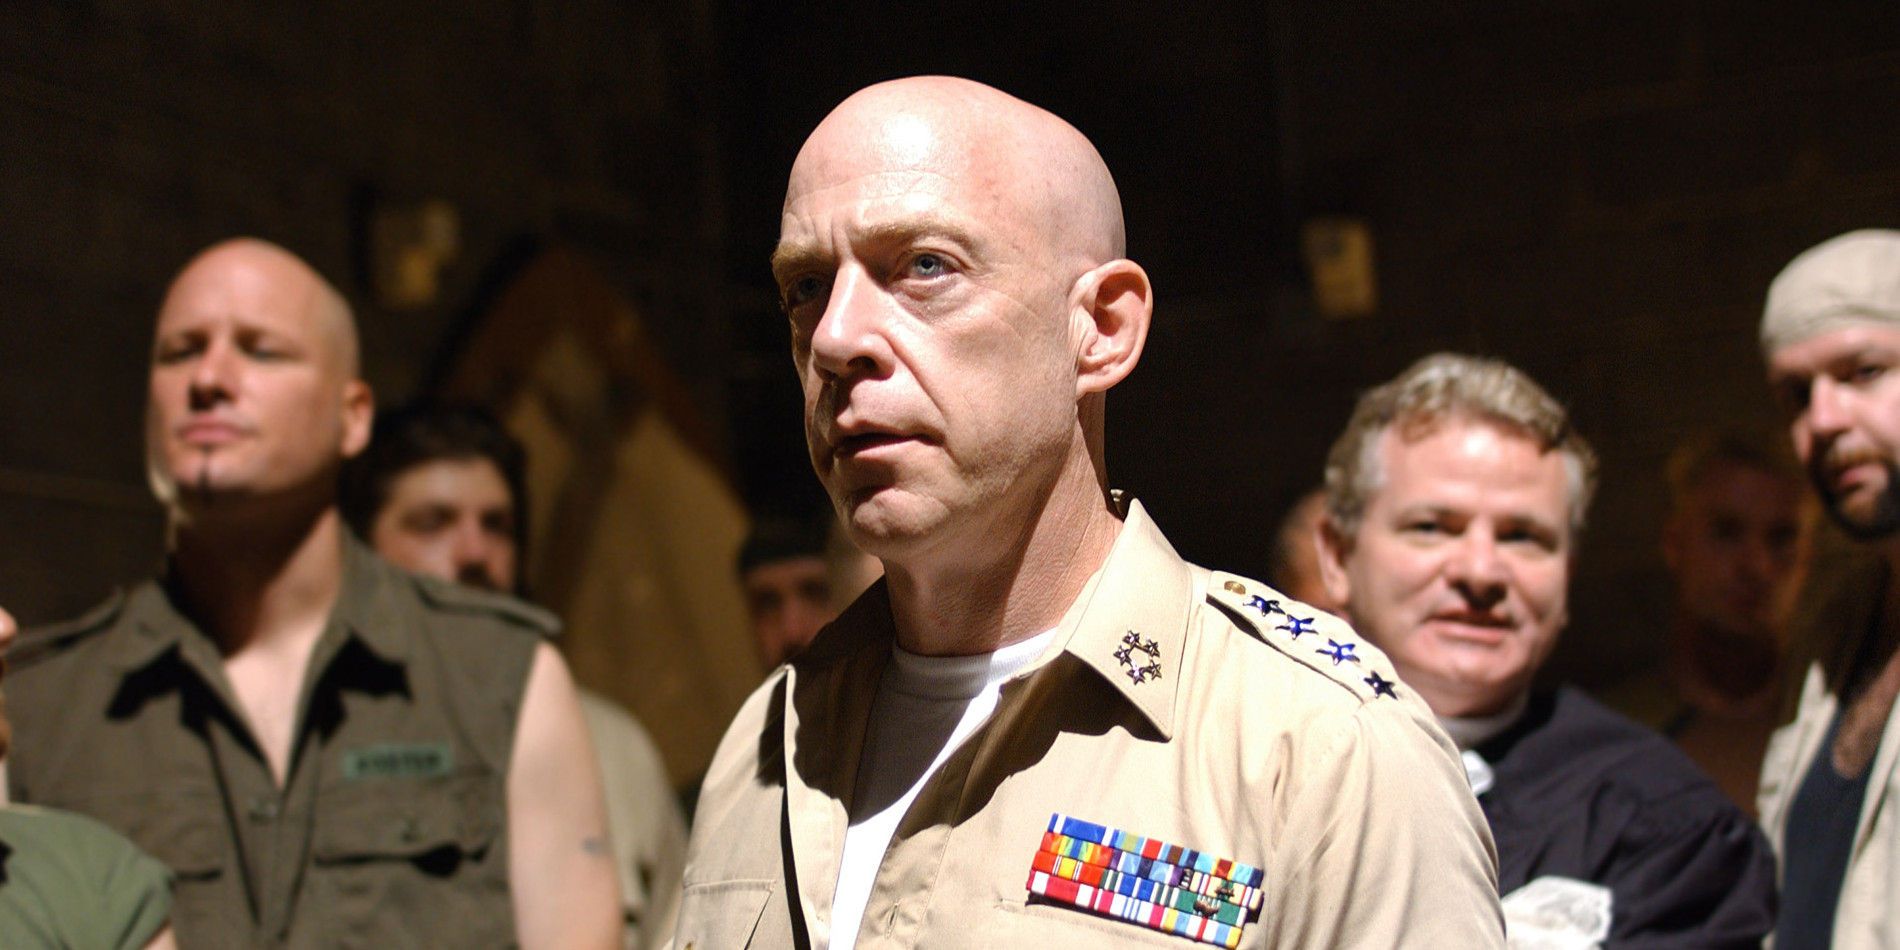 HBO's OZ with JK Simmons